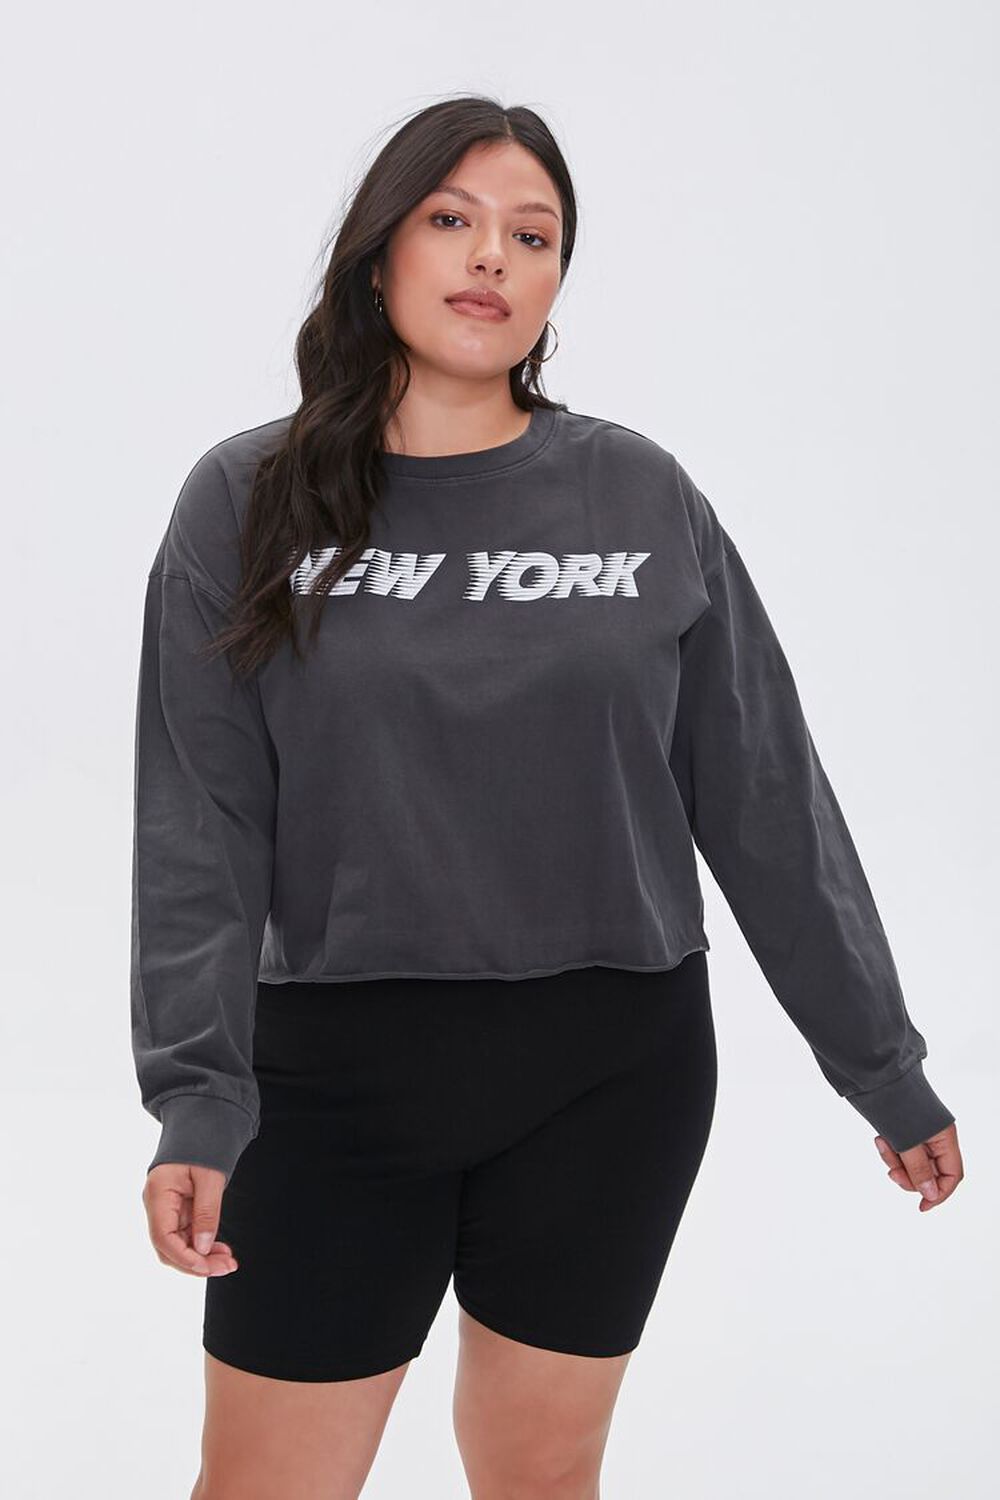 CHARCOAL/WHITE Plus Size New York Cropped Graphic Tee, image 1